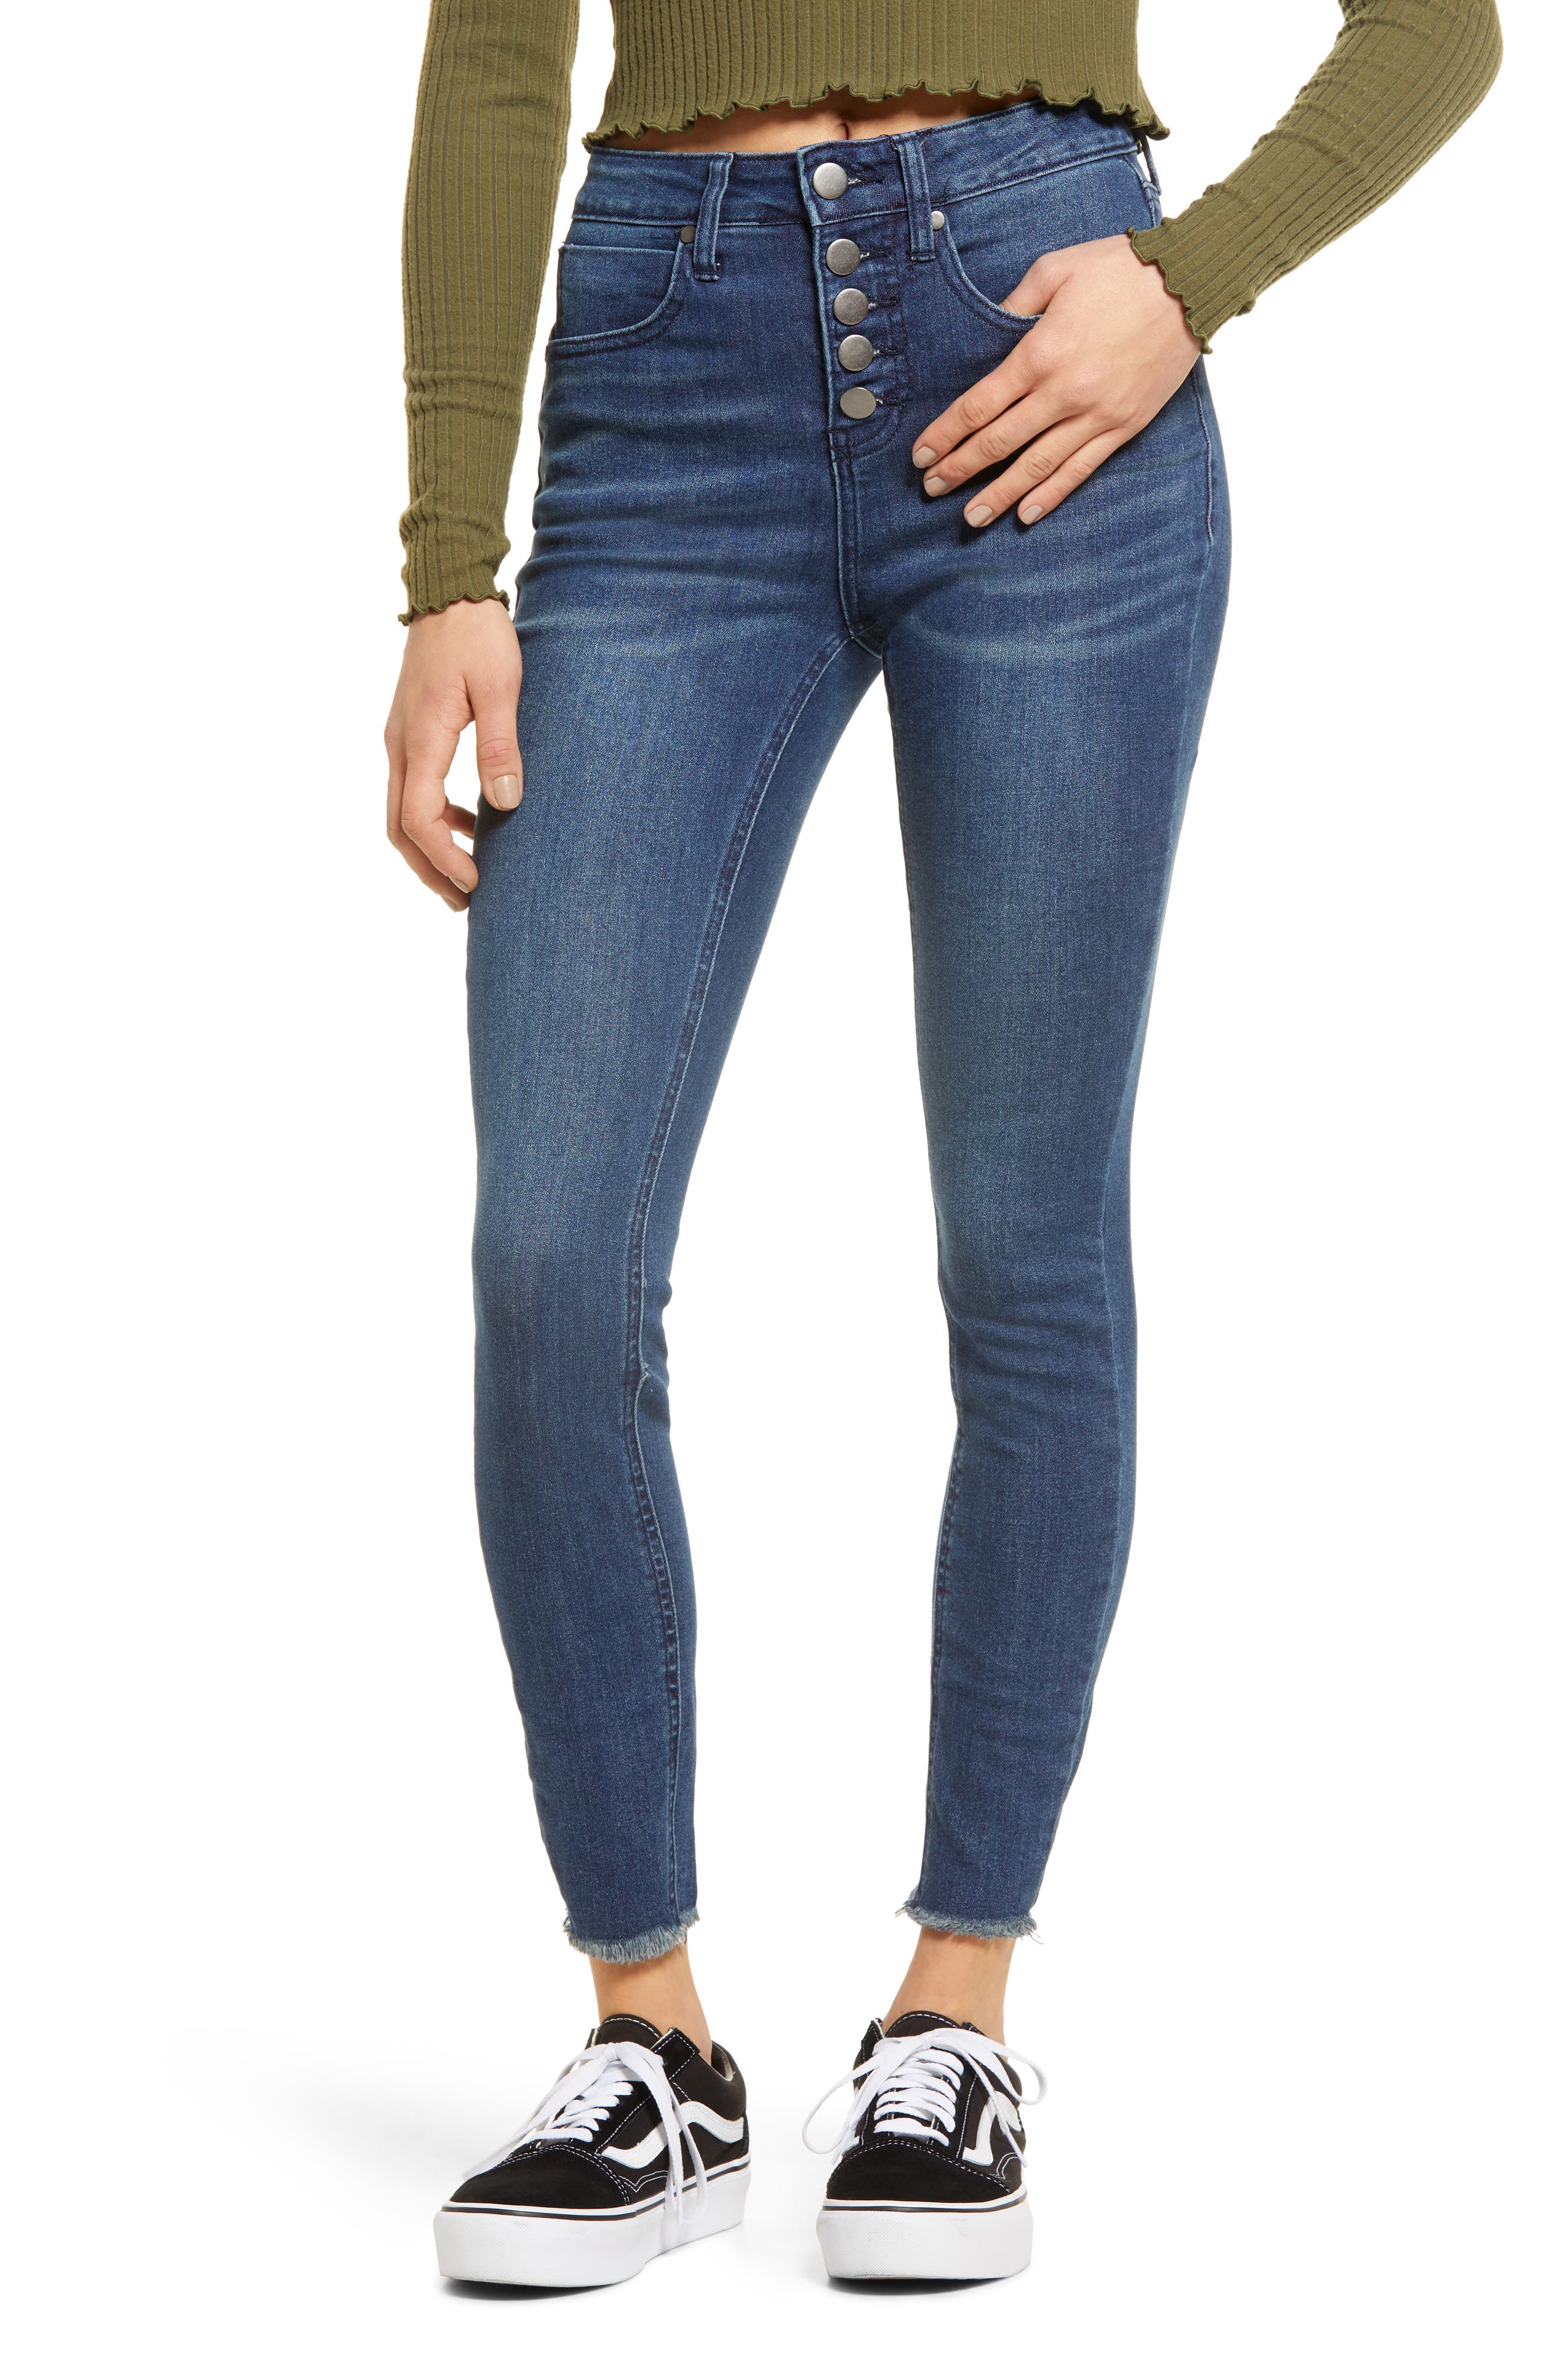 button fly skinny jeans womens